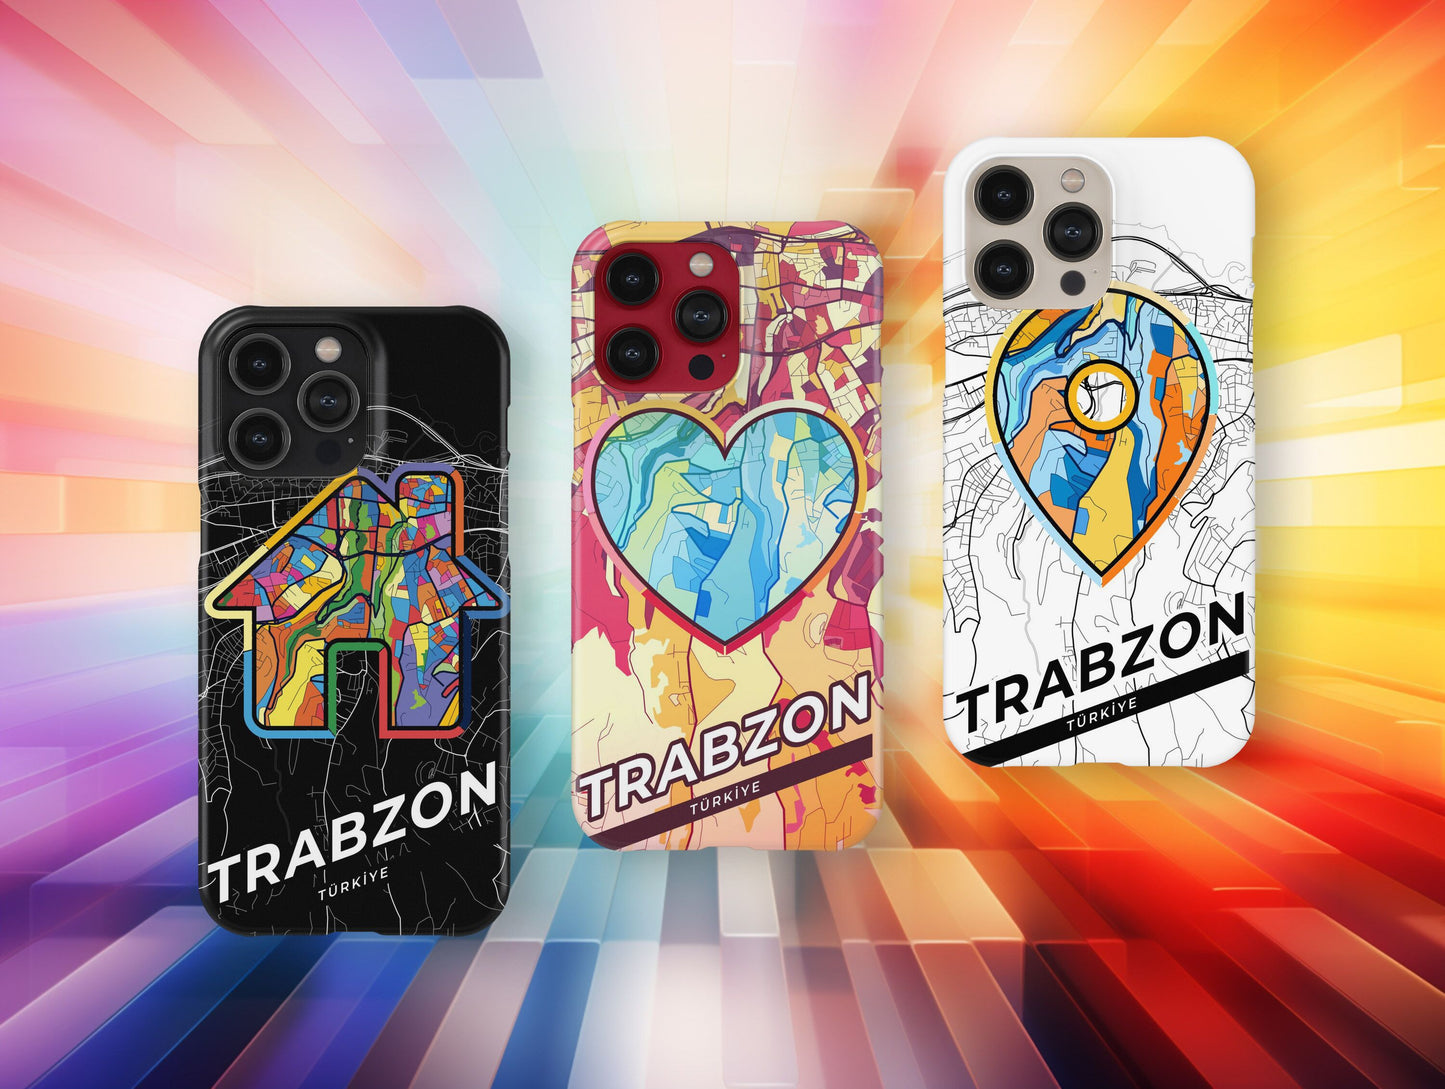 Trabzon Turkey slim phone case with colorful icon